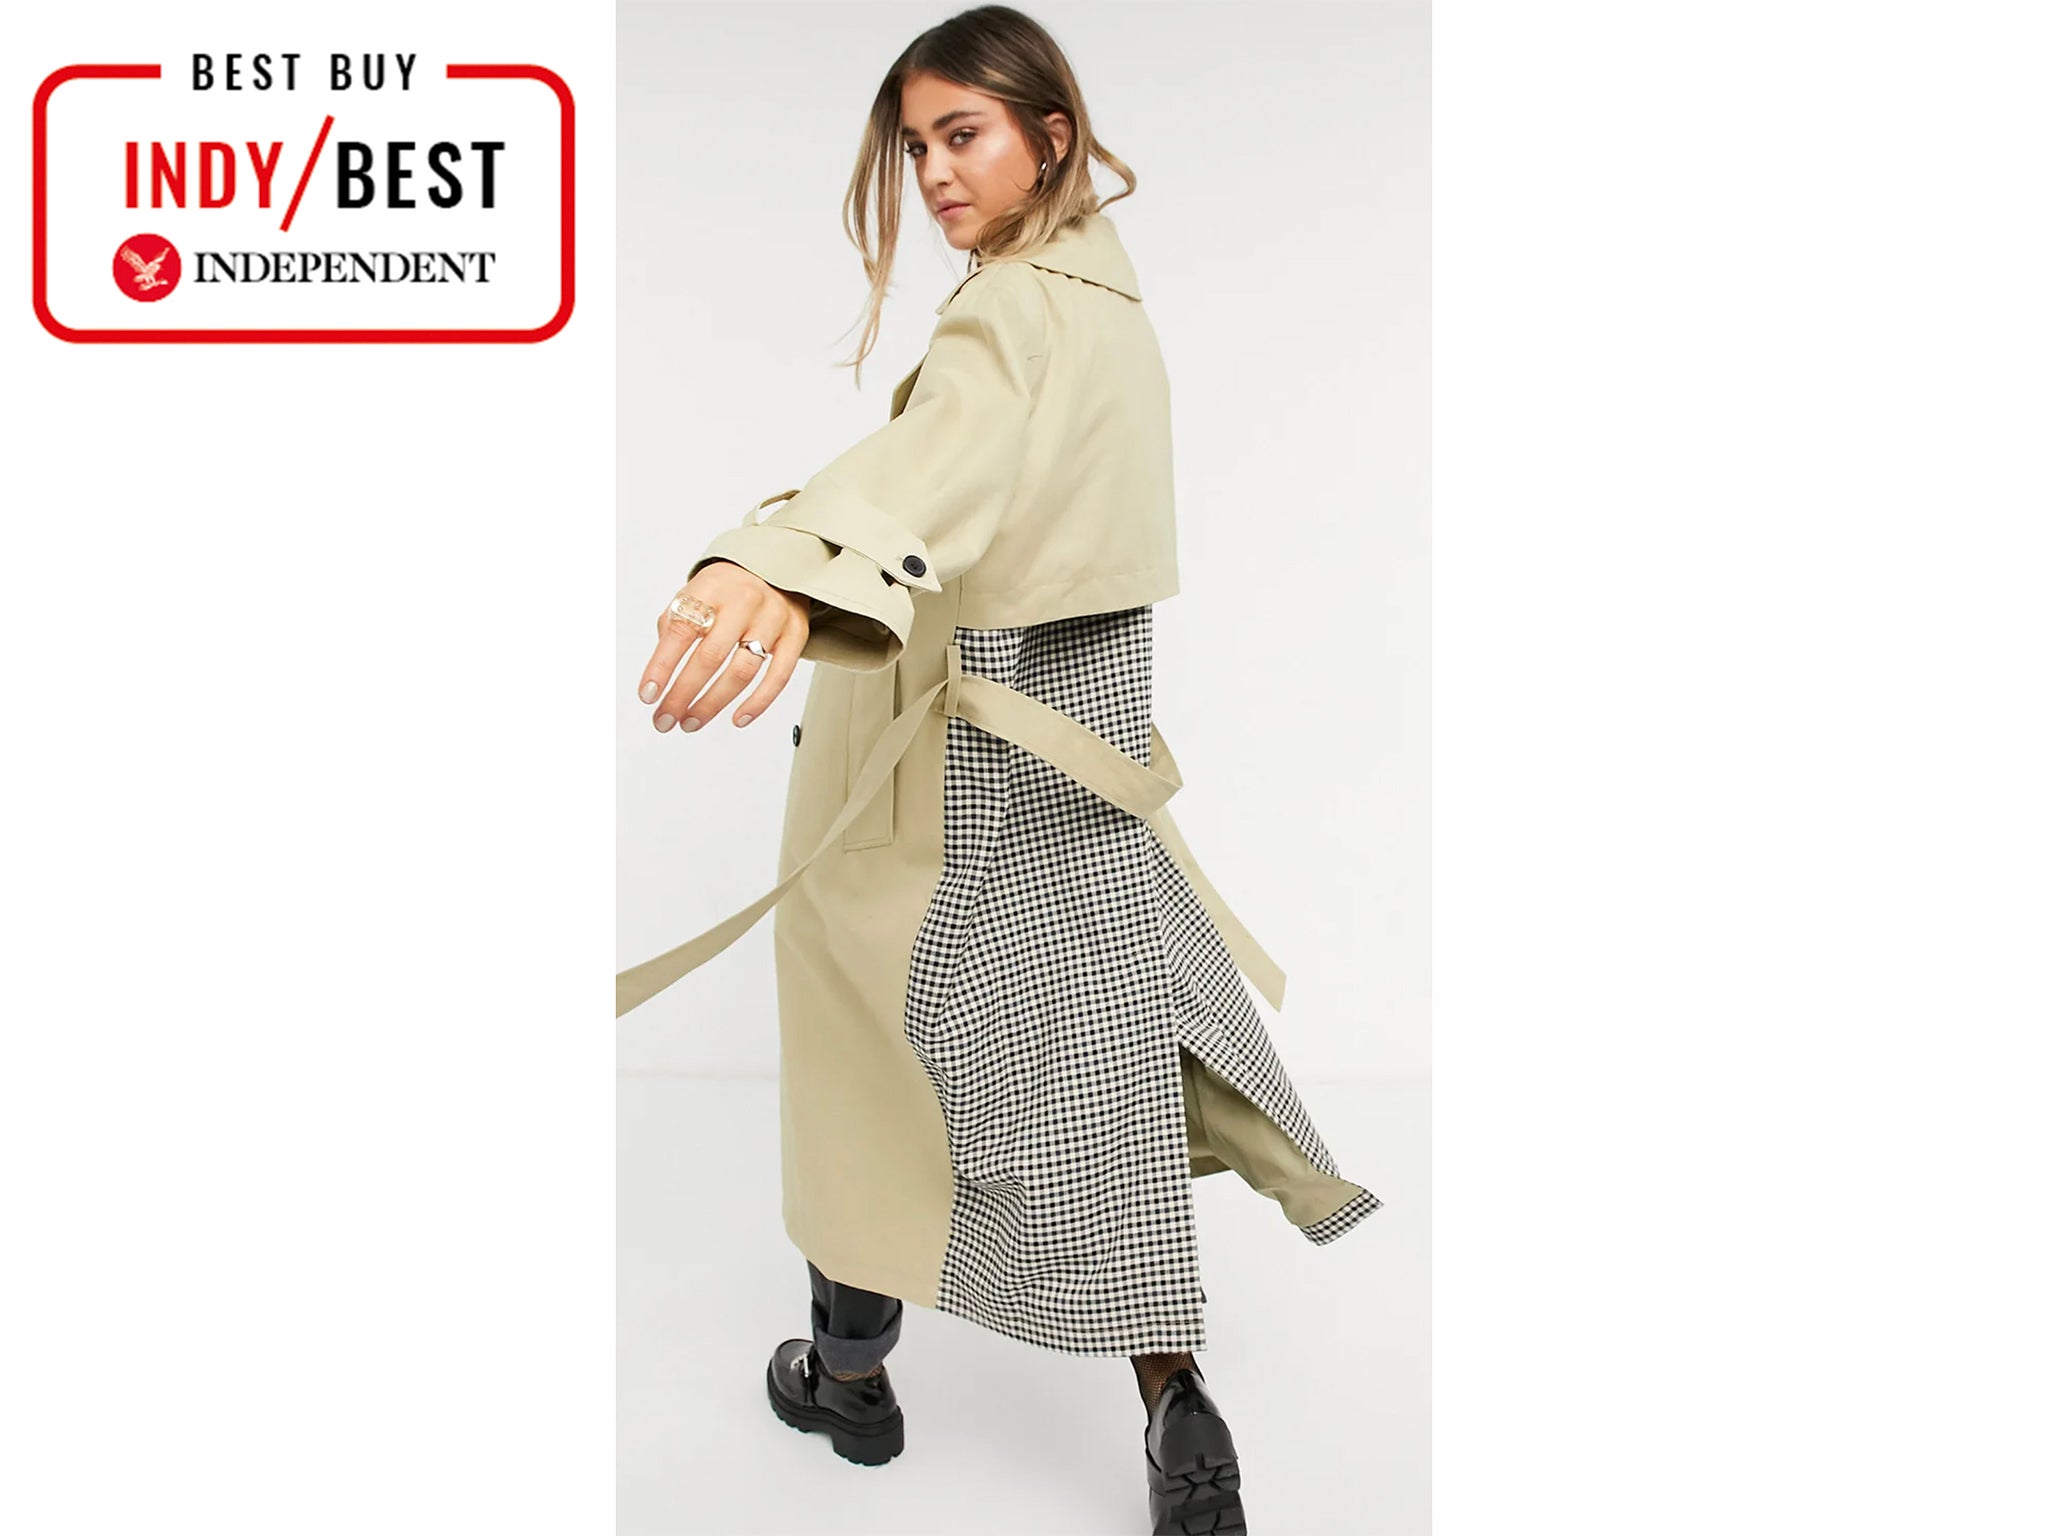 indybest-asos-trench-coat-viral-sell-out.jpg